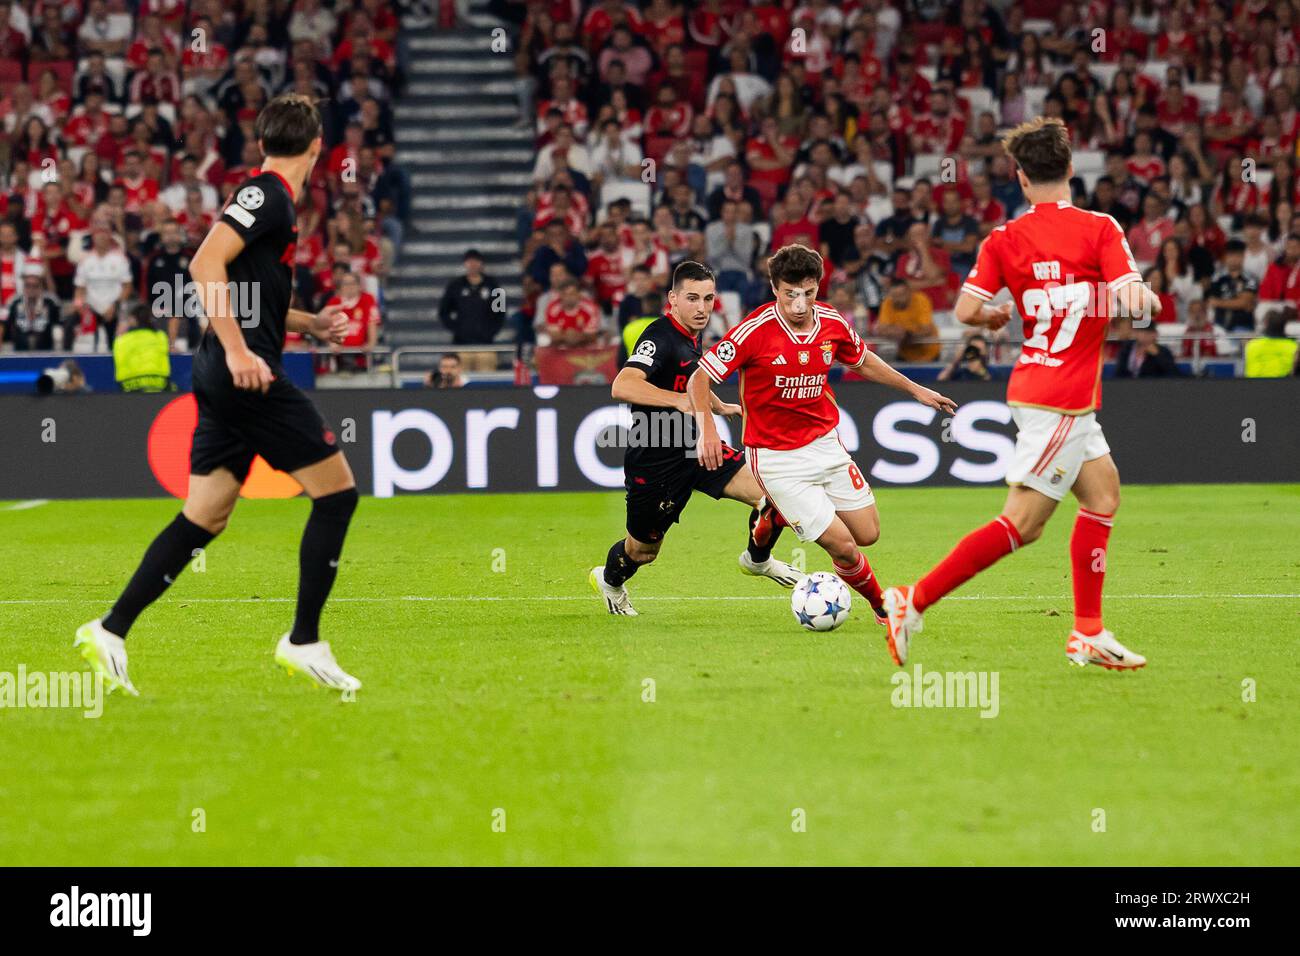 João Neves of SL Benfica seen in action during the champions league match between Benfica and FC Red Bull Salzburg at Estádio da Luz stadium. FC Salzburg won against SL Benfica by 0 - 2 Stock Photo